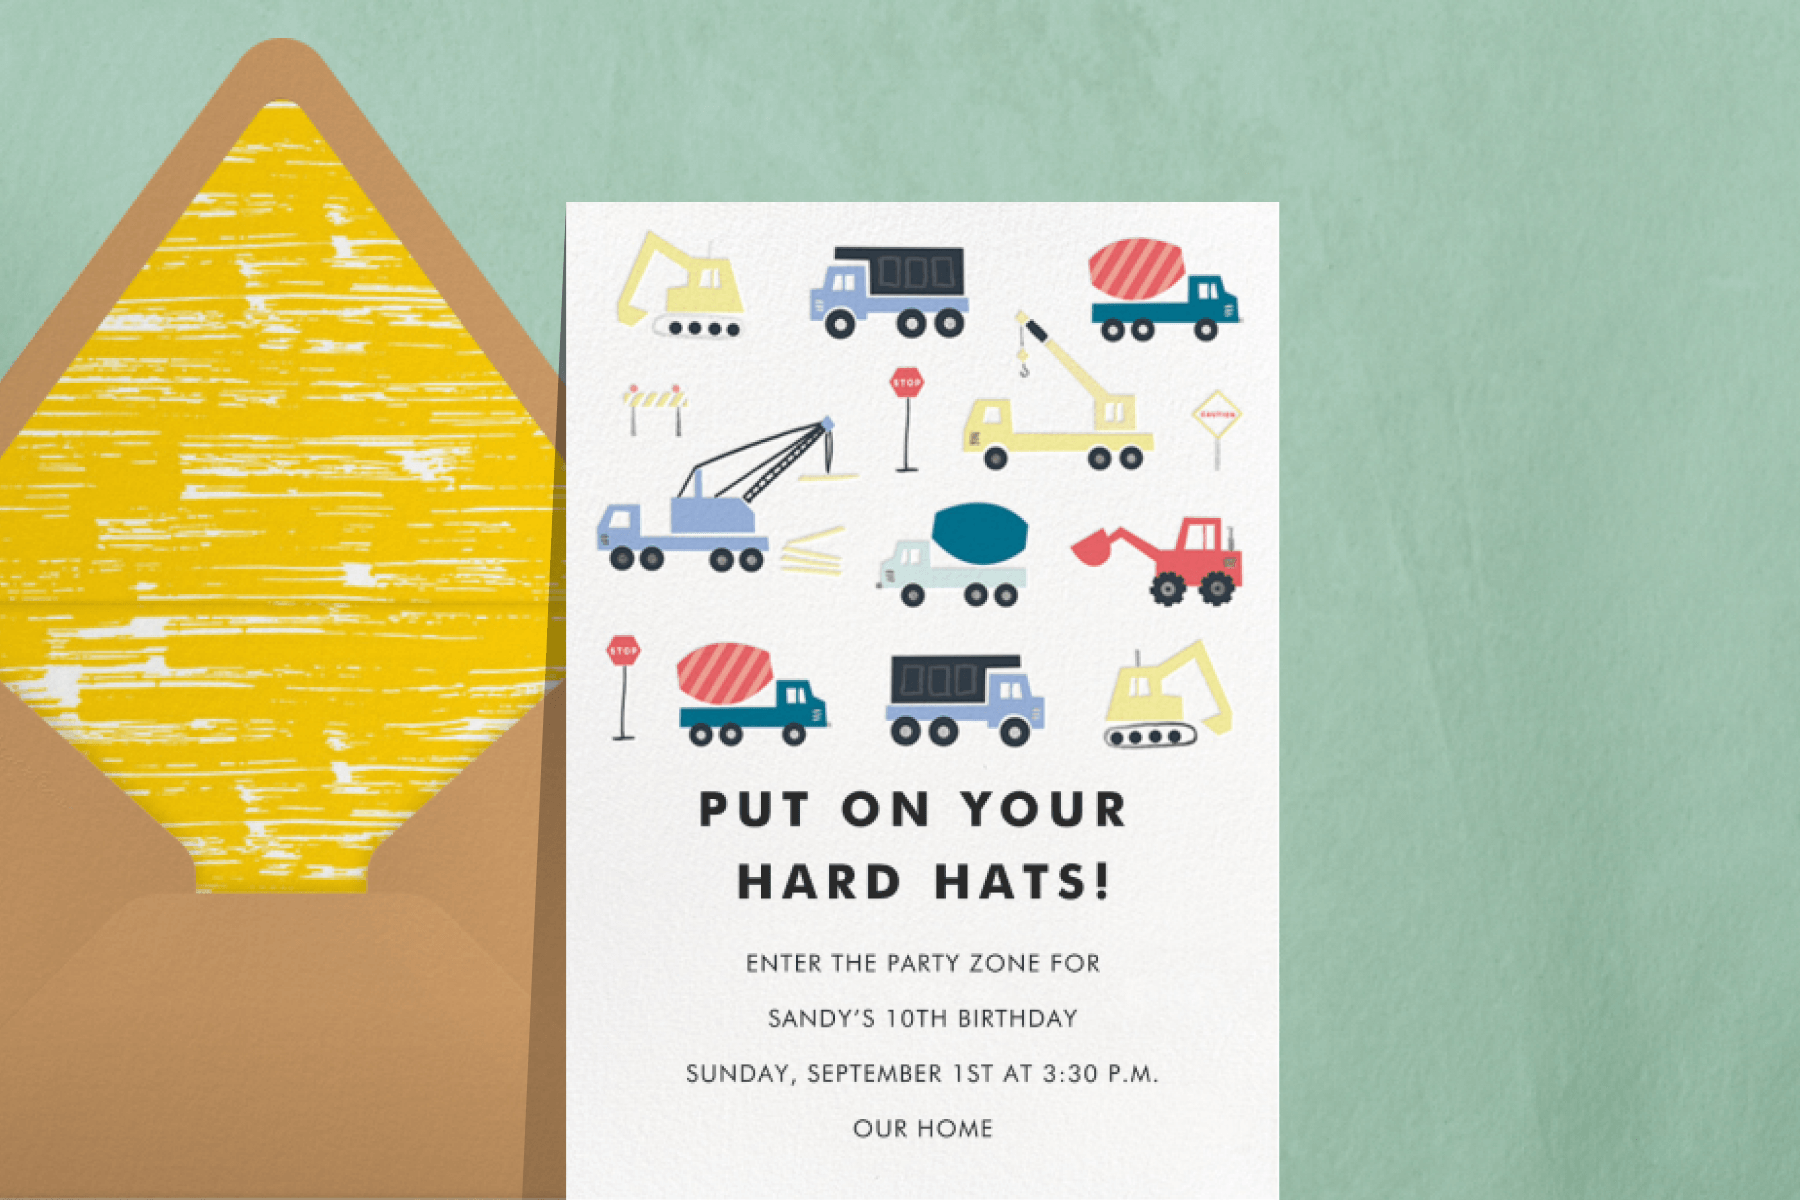 A kids’ birthday party invitation featuring trucks and construction equipment.